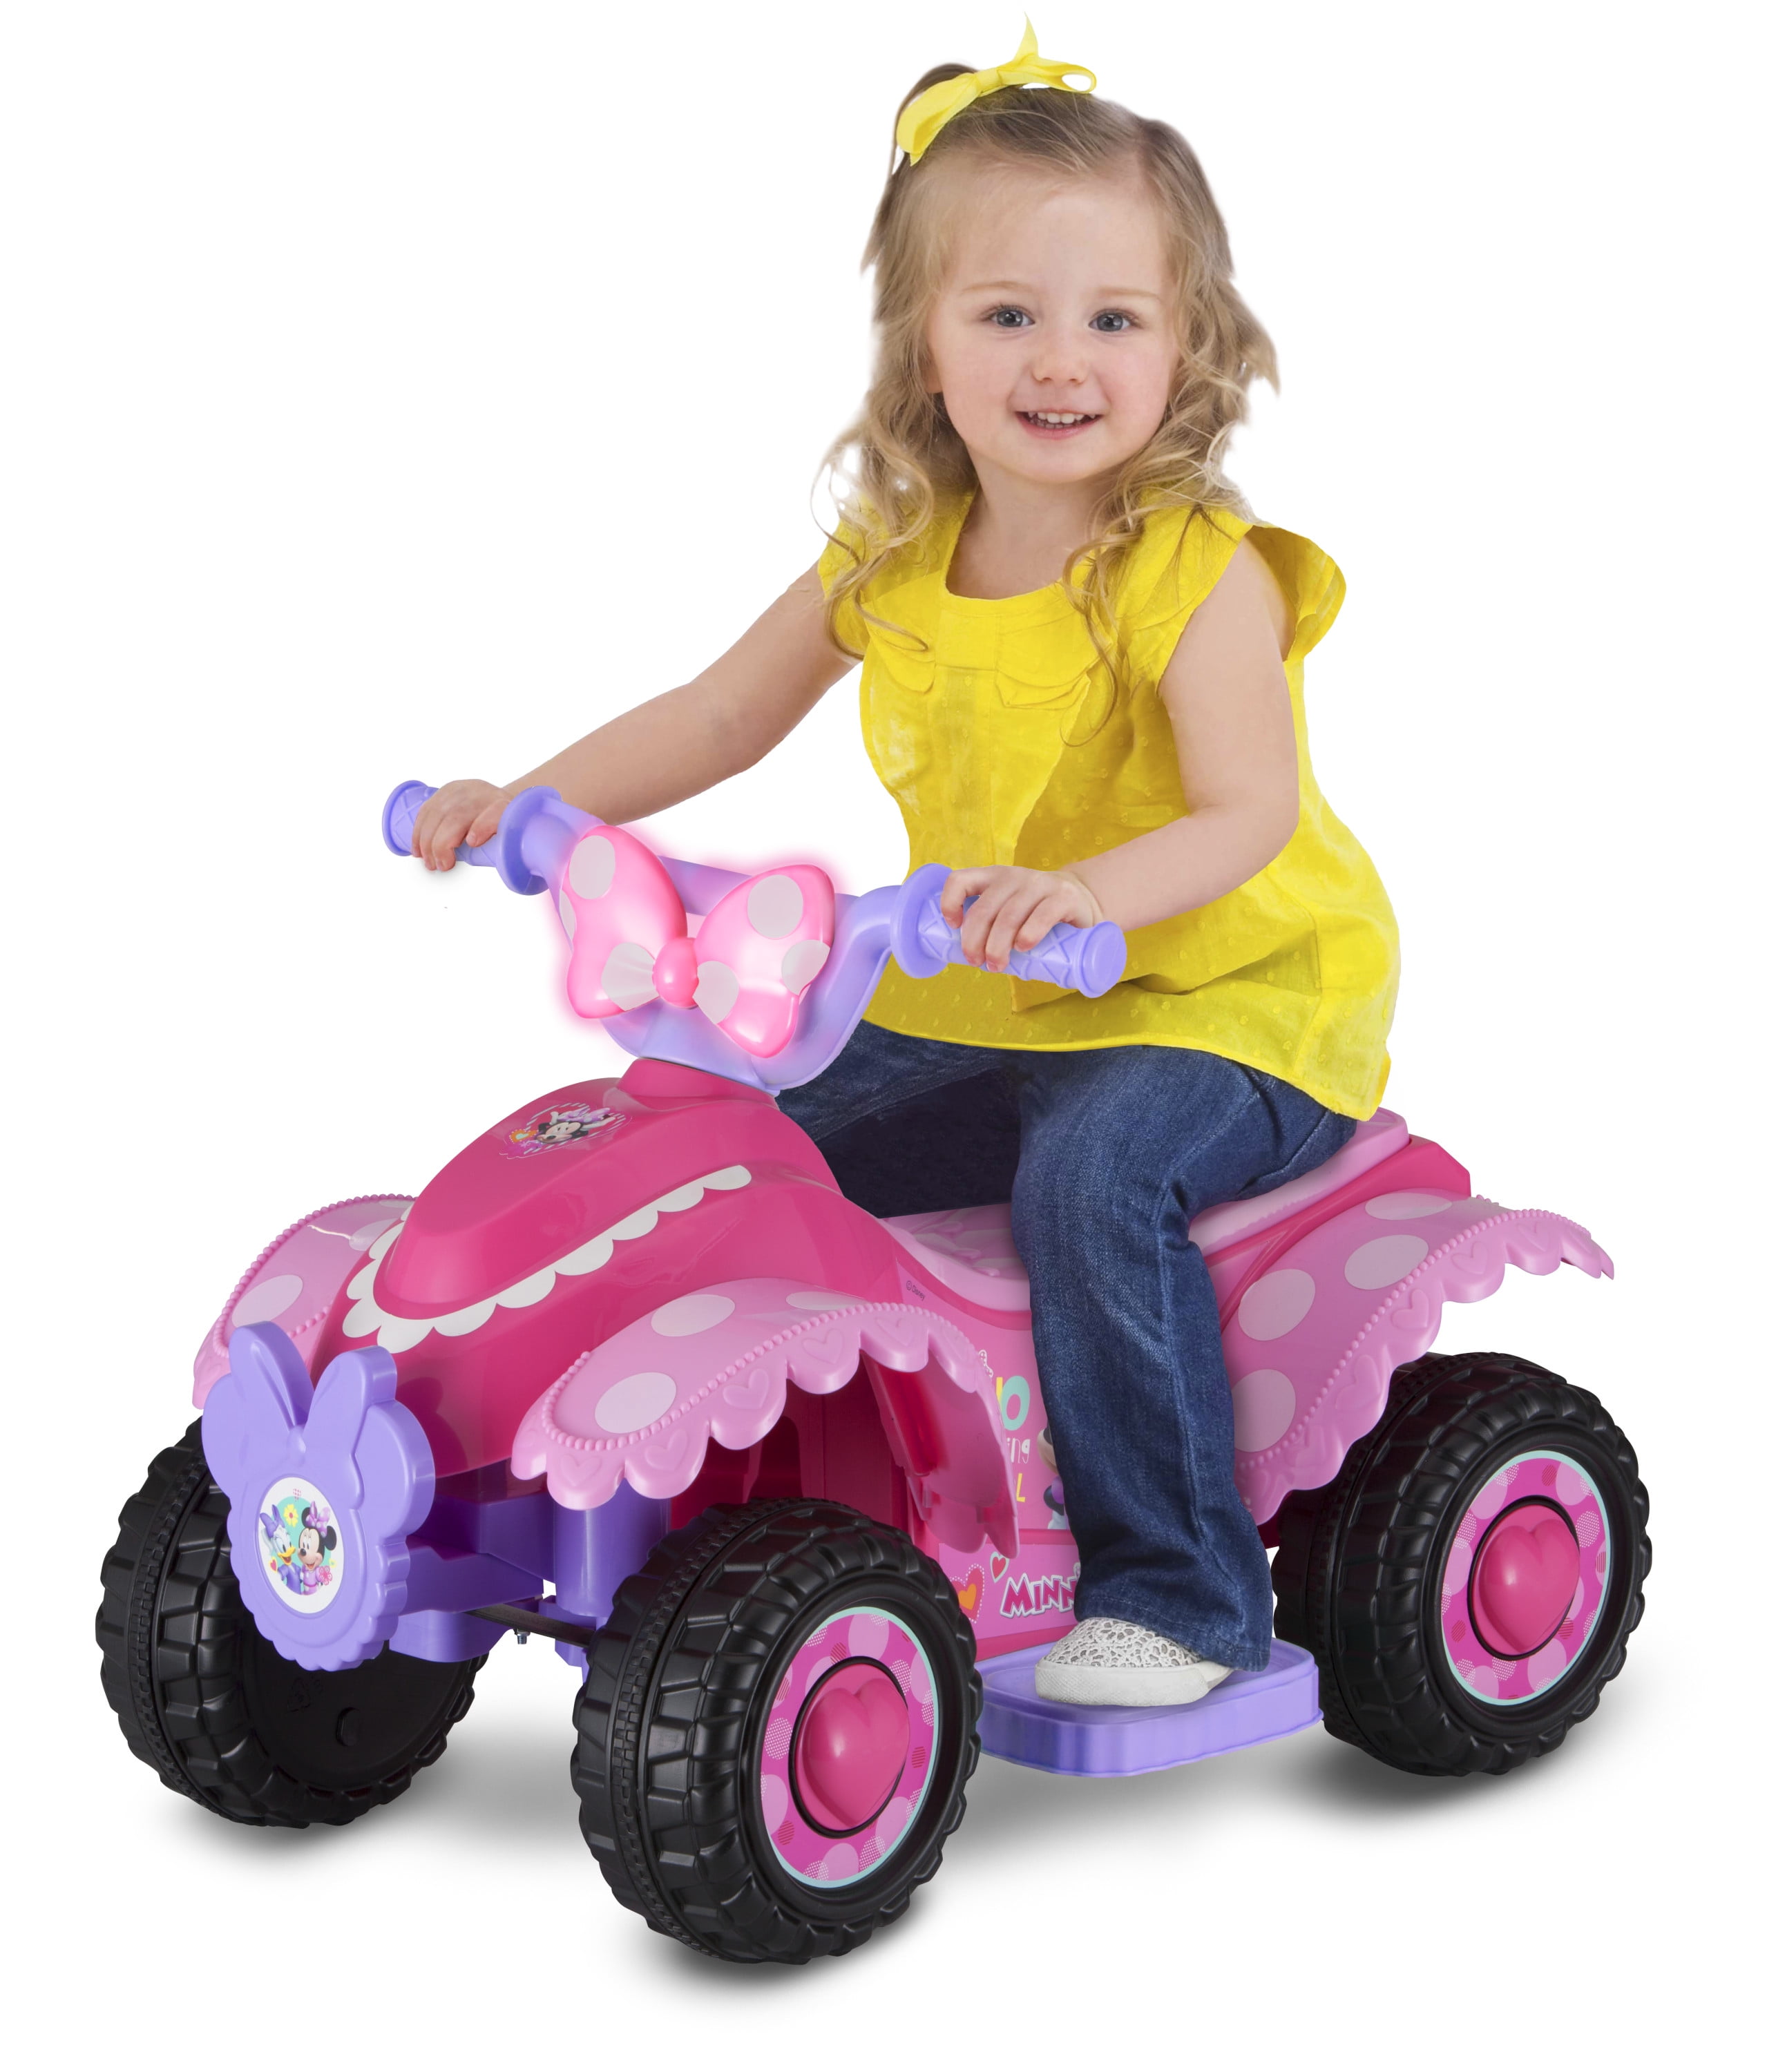 Disney's Minnie Mouse Toddler Ride-on Toy by Kid Trax for sale online 